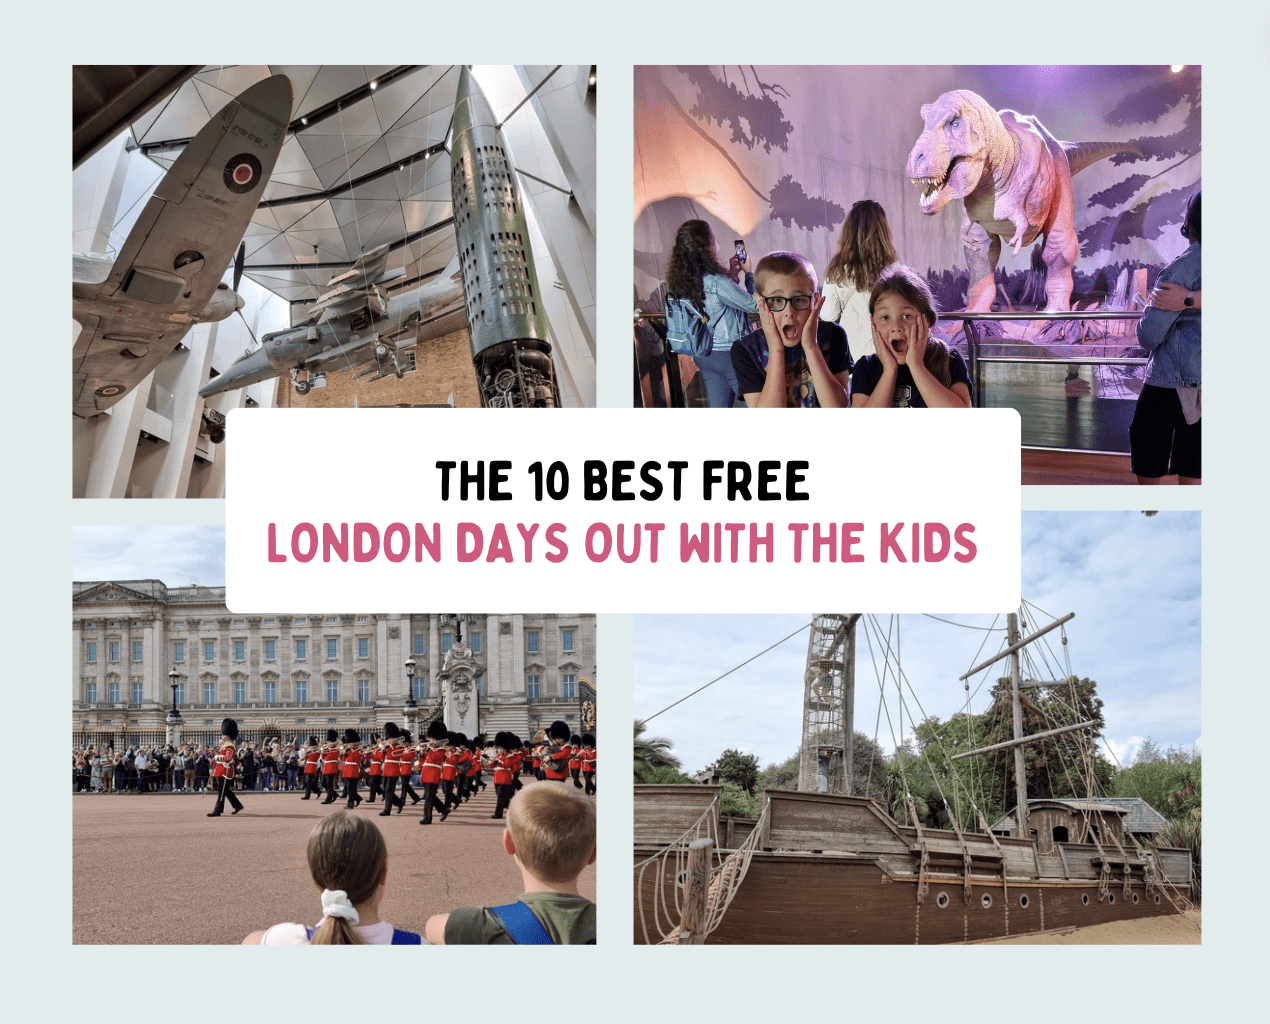 Frugal family days out, The 10 best FREE places to visit in London with kids, frugal mum